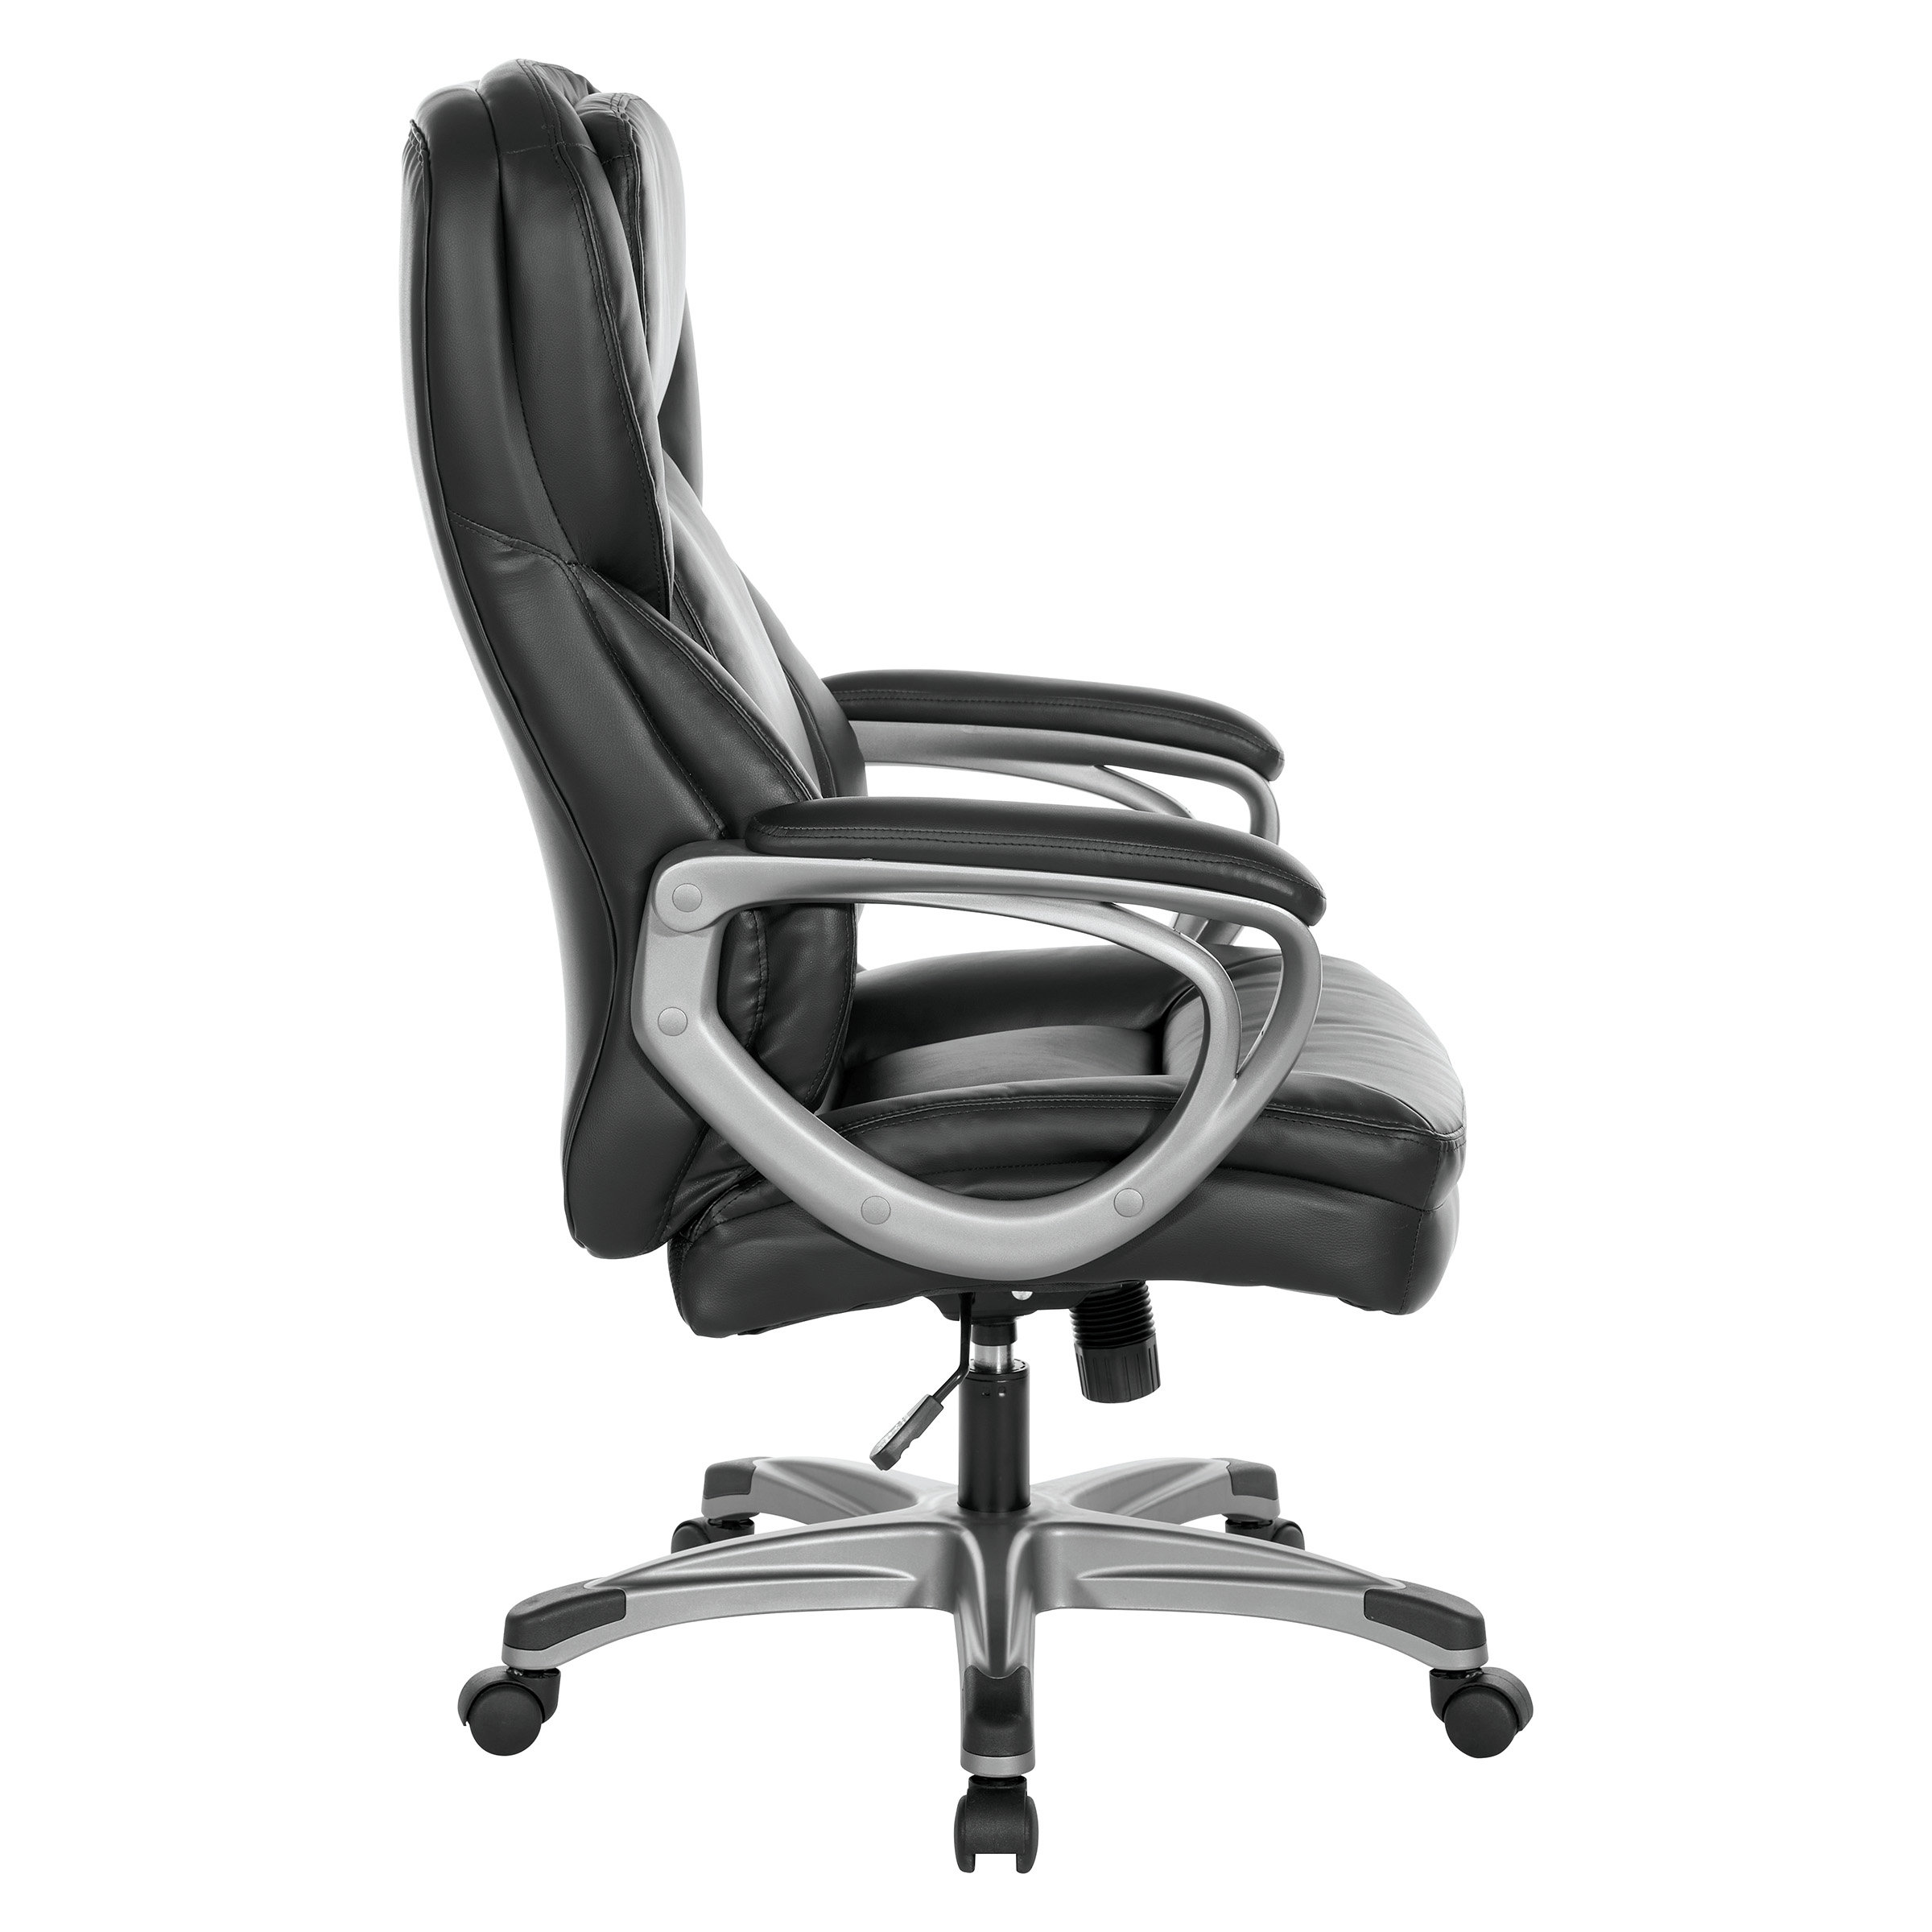 Inbox Zero Elianagrace Reclining Office Chair with Massage, Heating, Ergonomic  Office Chair with Foot Rest & Reviews